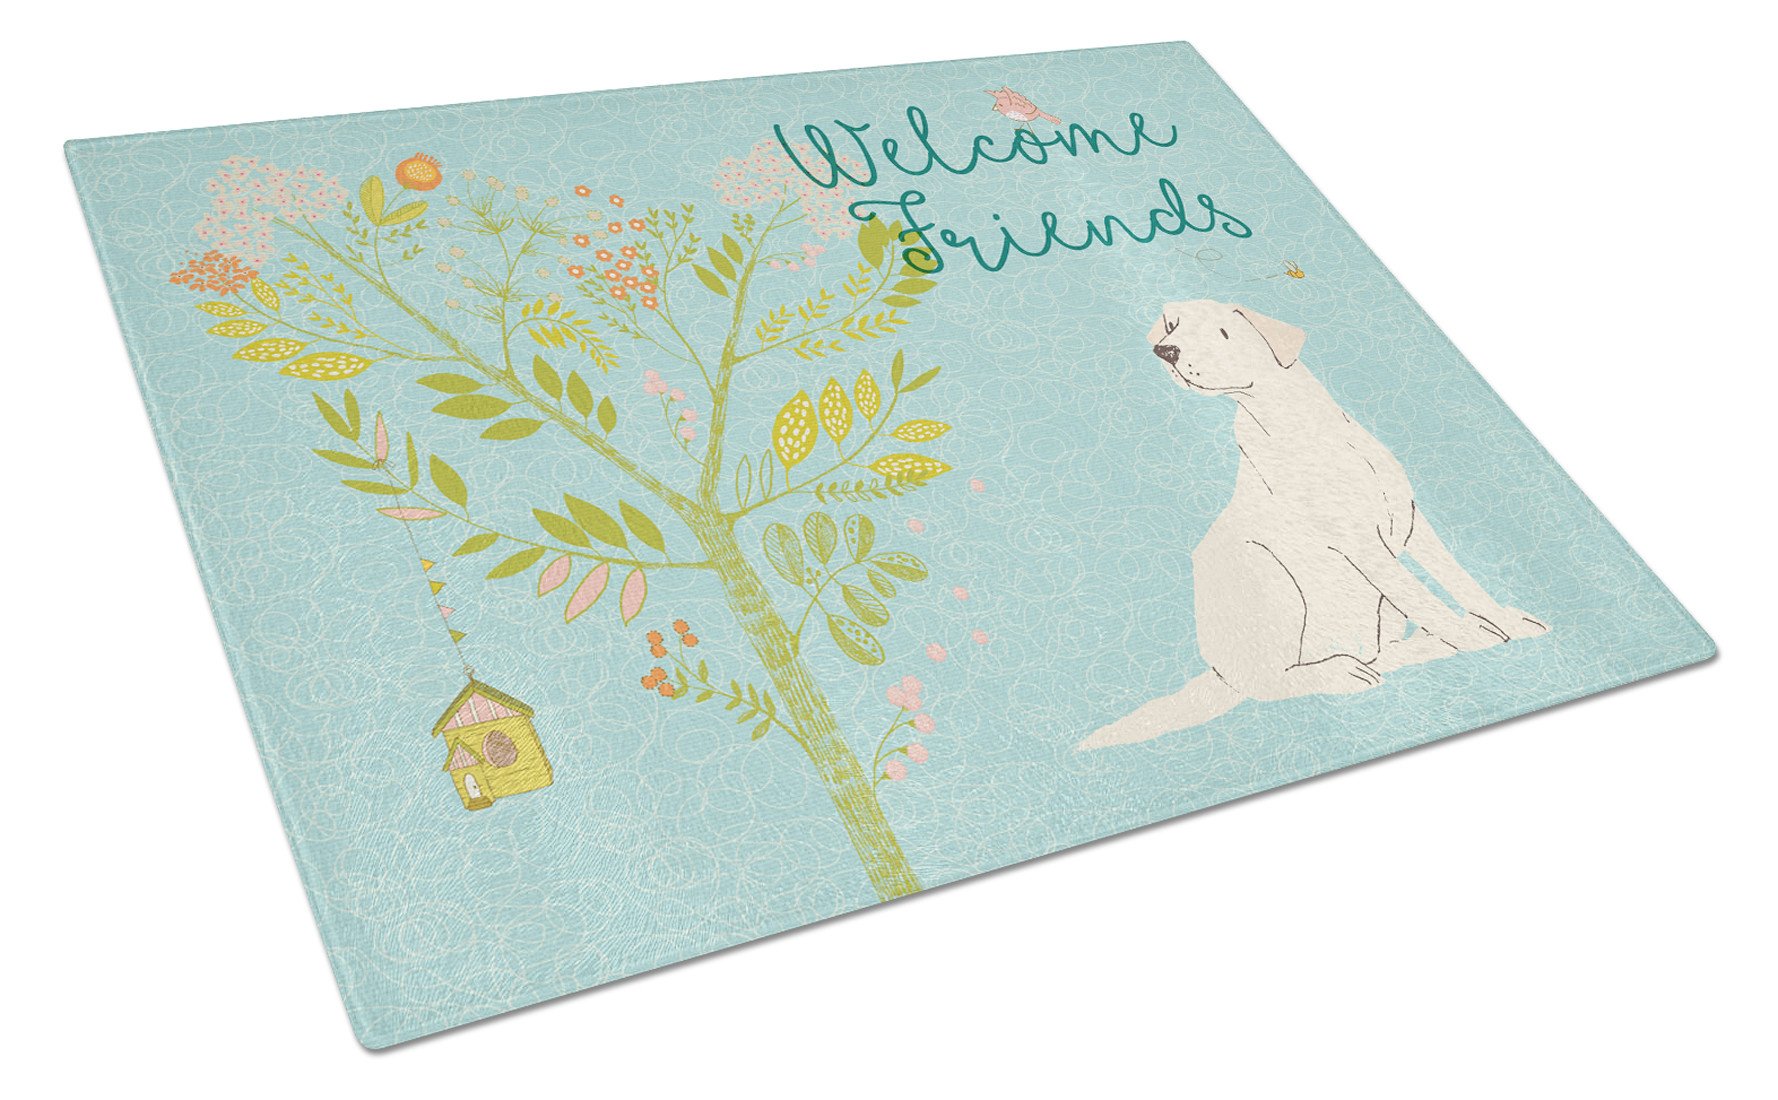 Welcome Friends Yellow Labrador Retriever Glass Cutting Board Large BB7596LCB by Caroline's Treasures